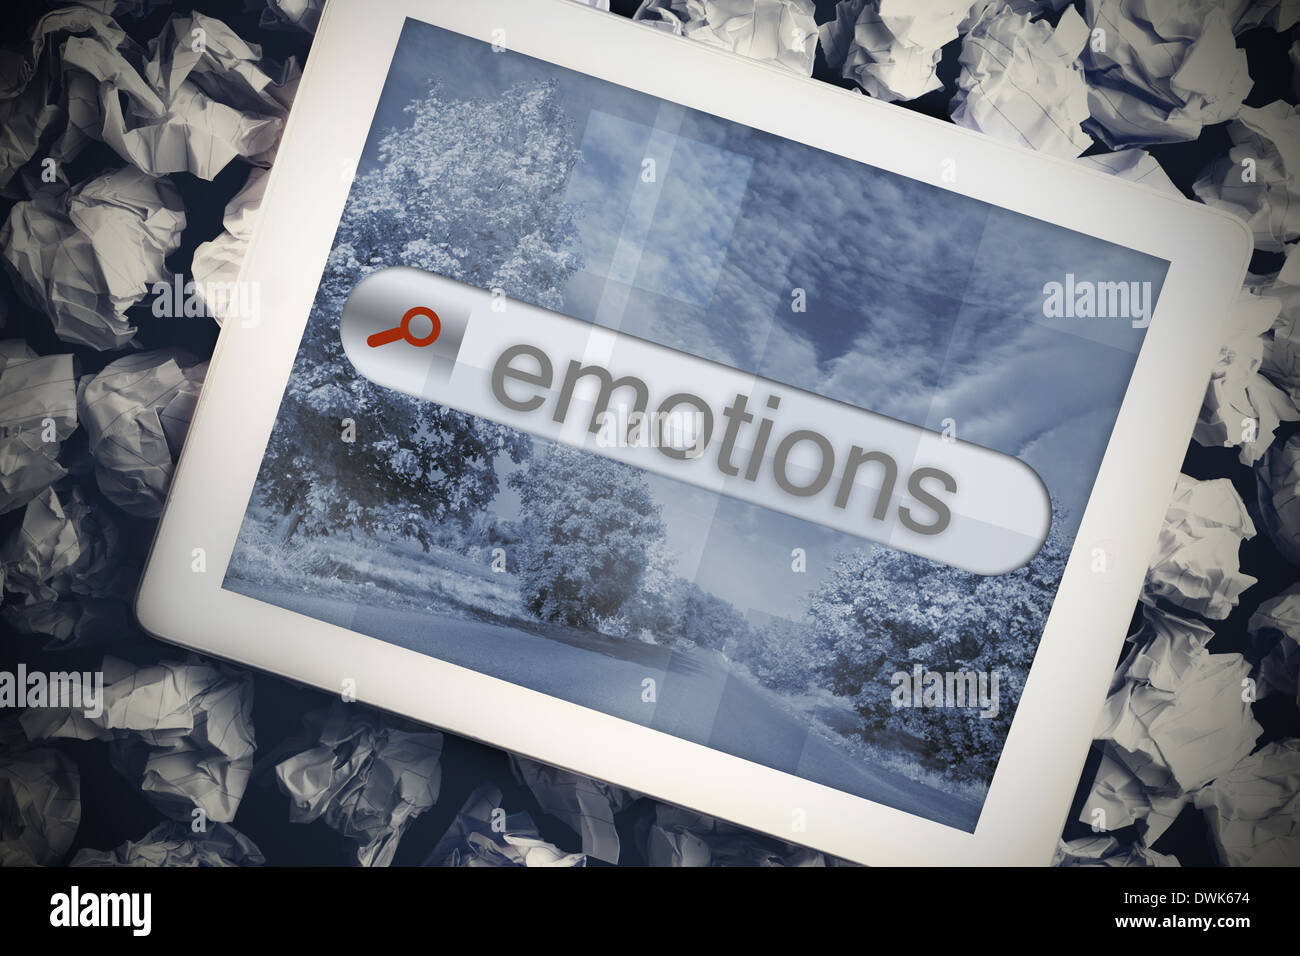 Emotions in search bar on tablet screen Stock Photo